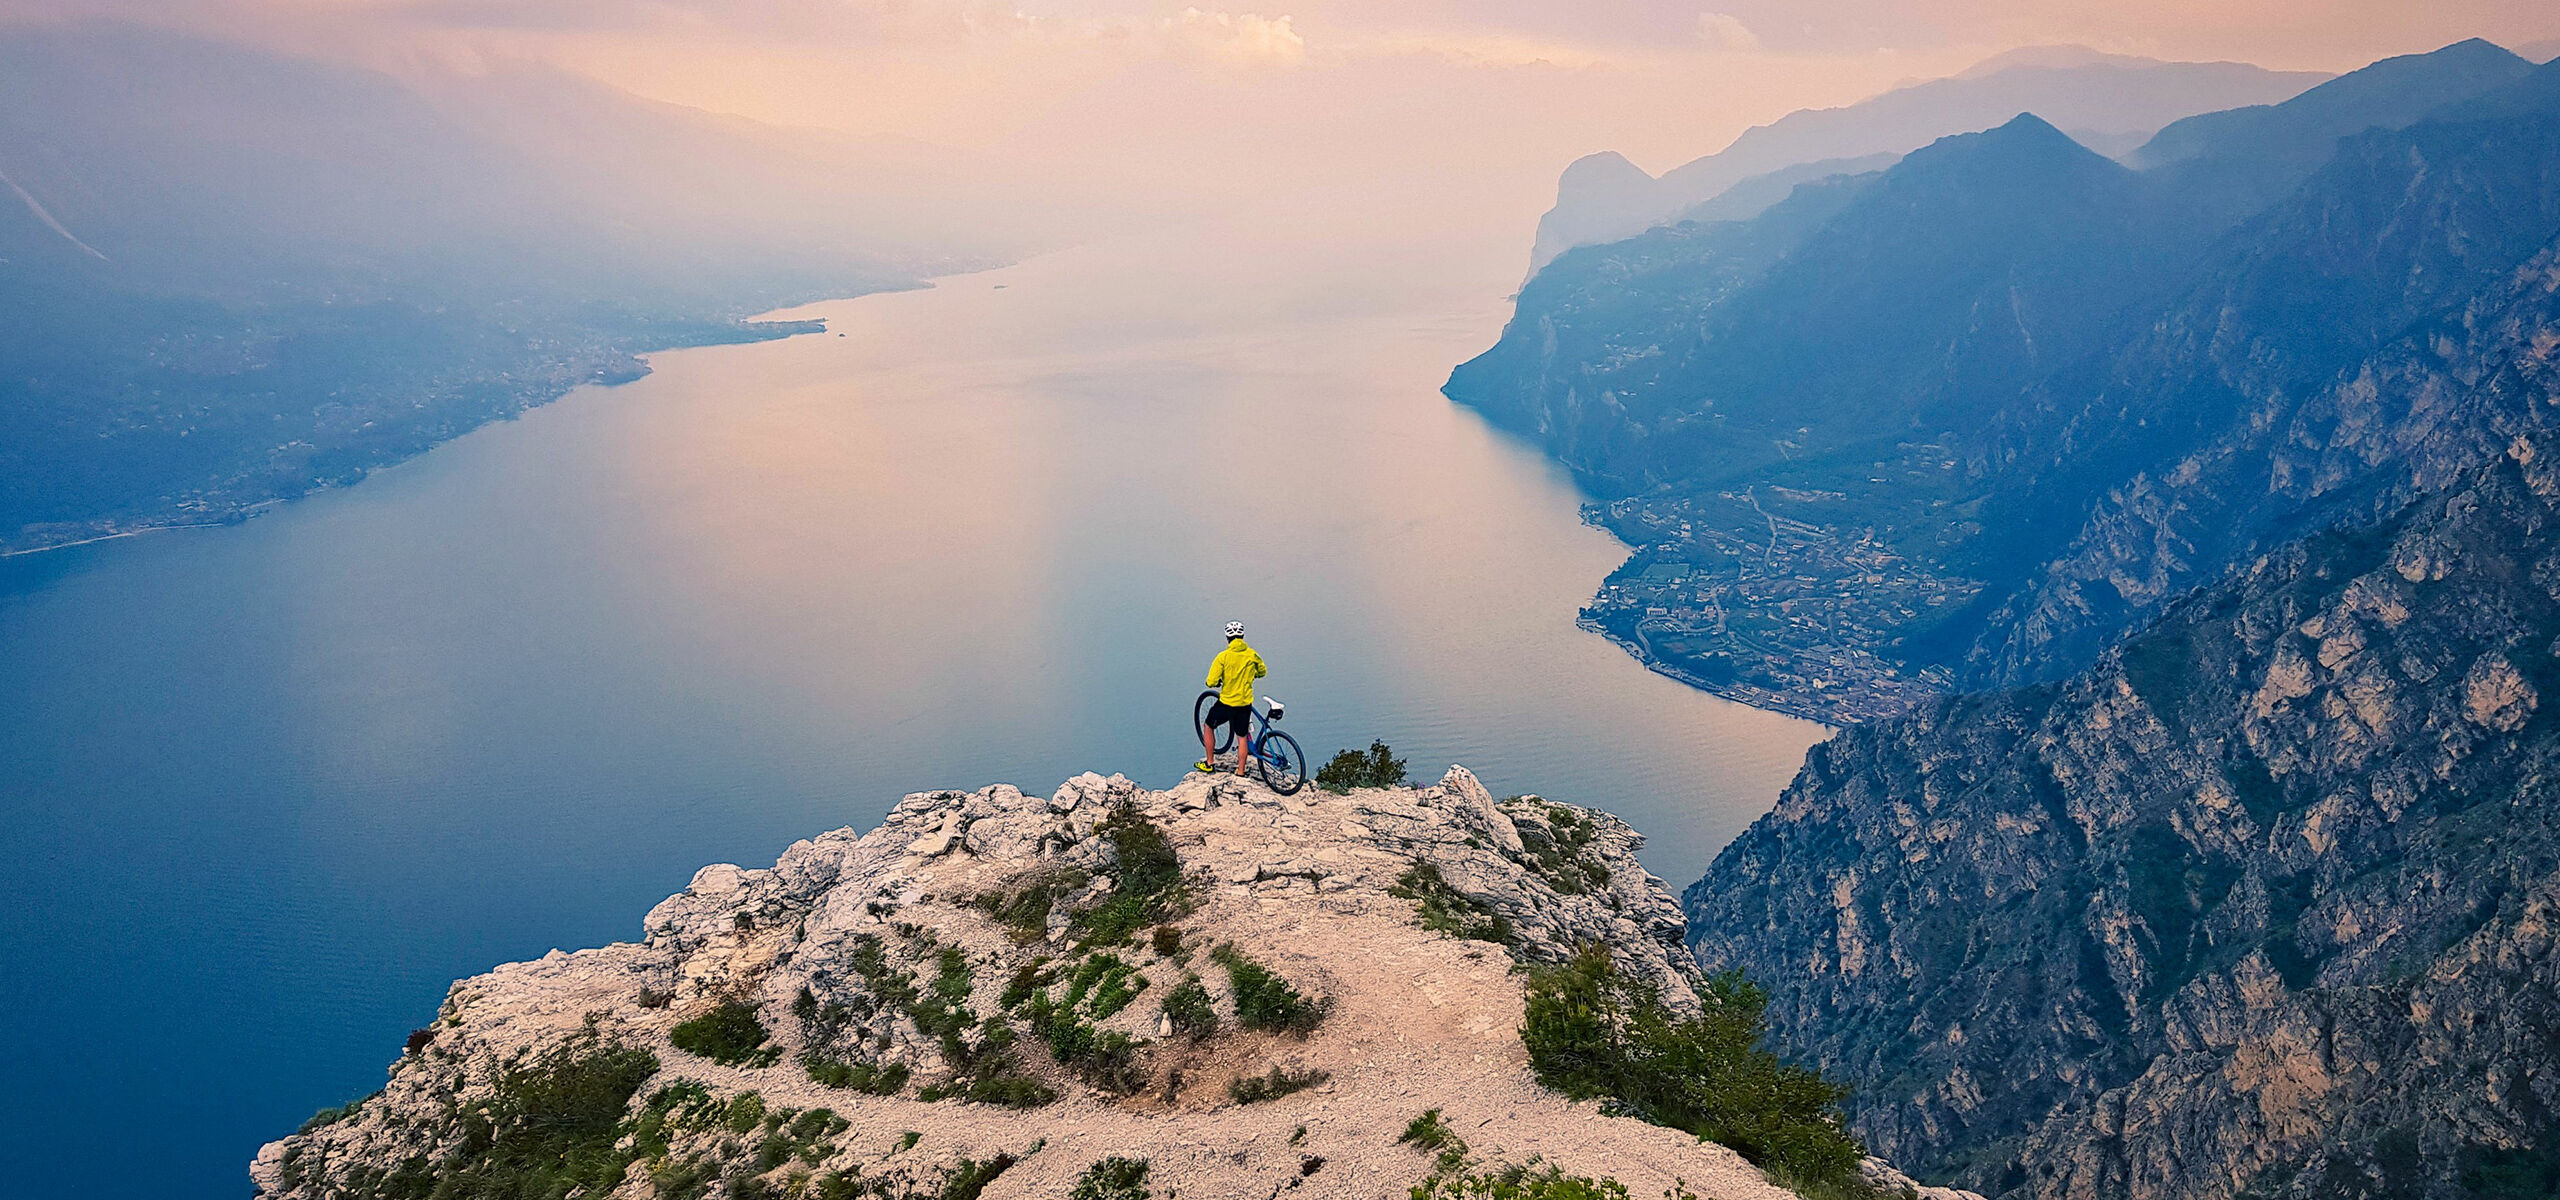 5 not-to-be-missed scenic spots over Lake Garda 